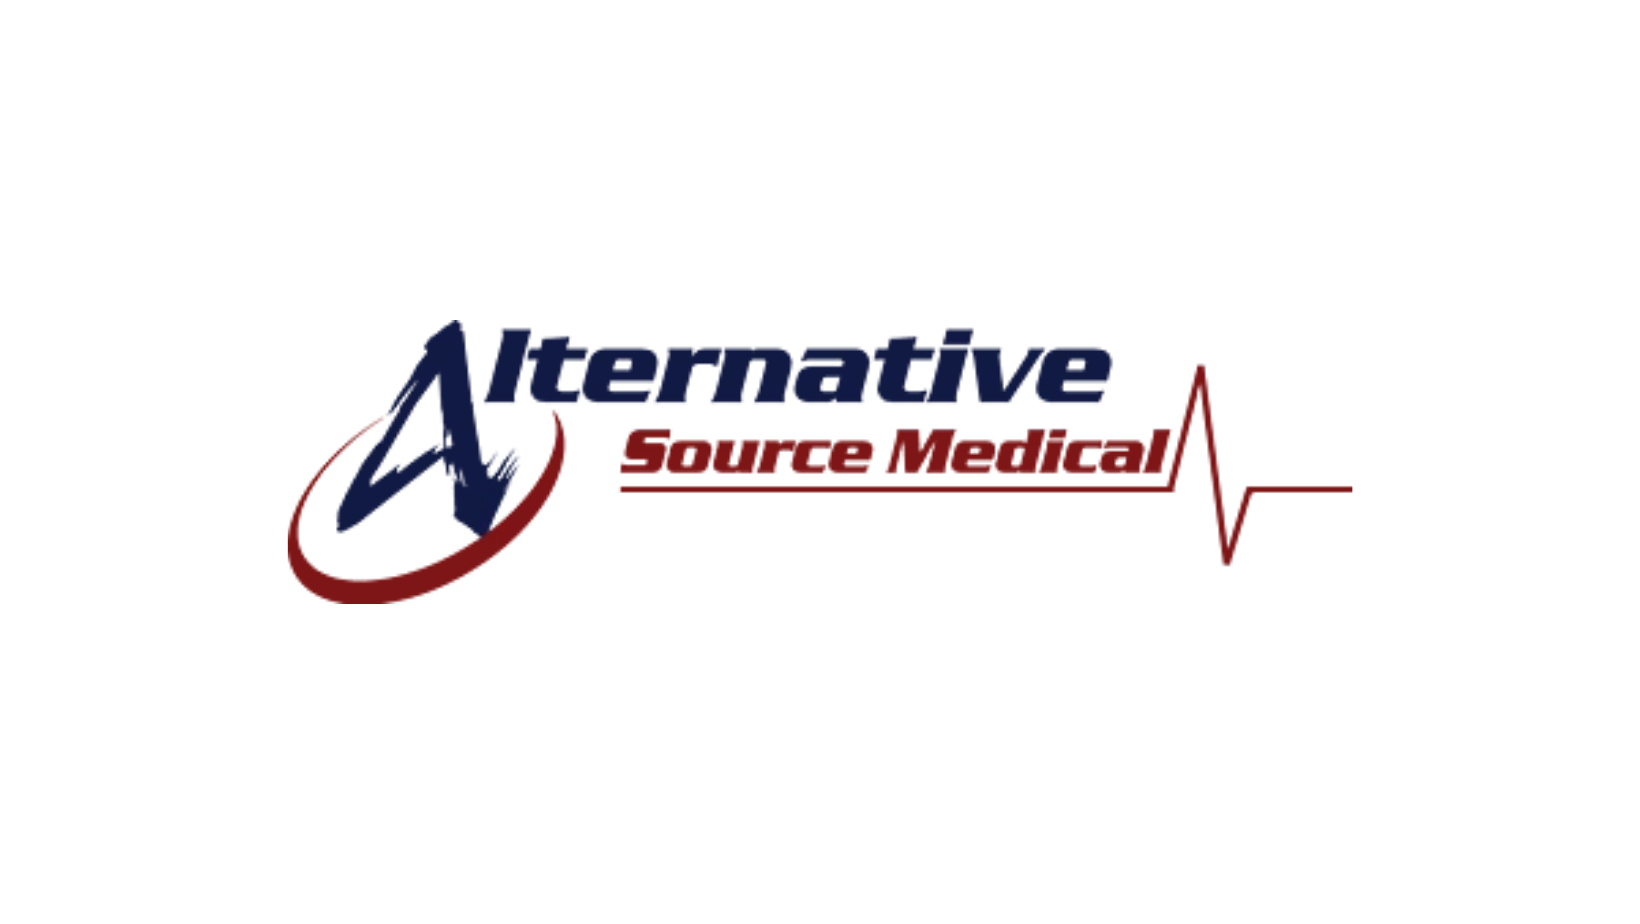 Alternative Source Medical: A One-stop Shop for All Your Equipment Needs